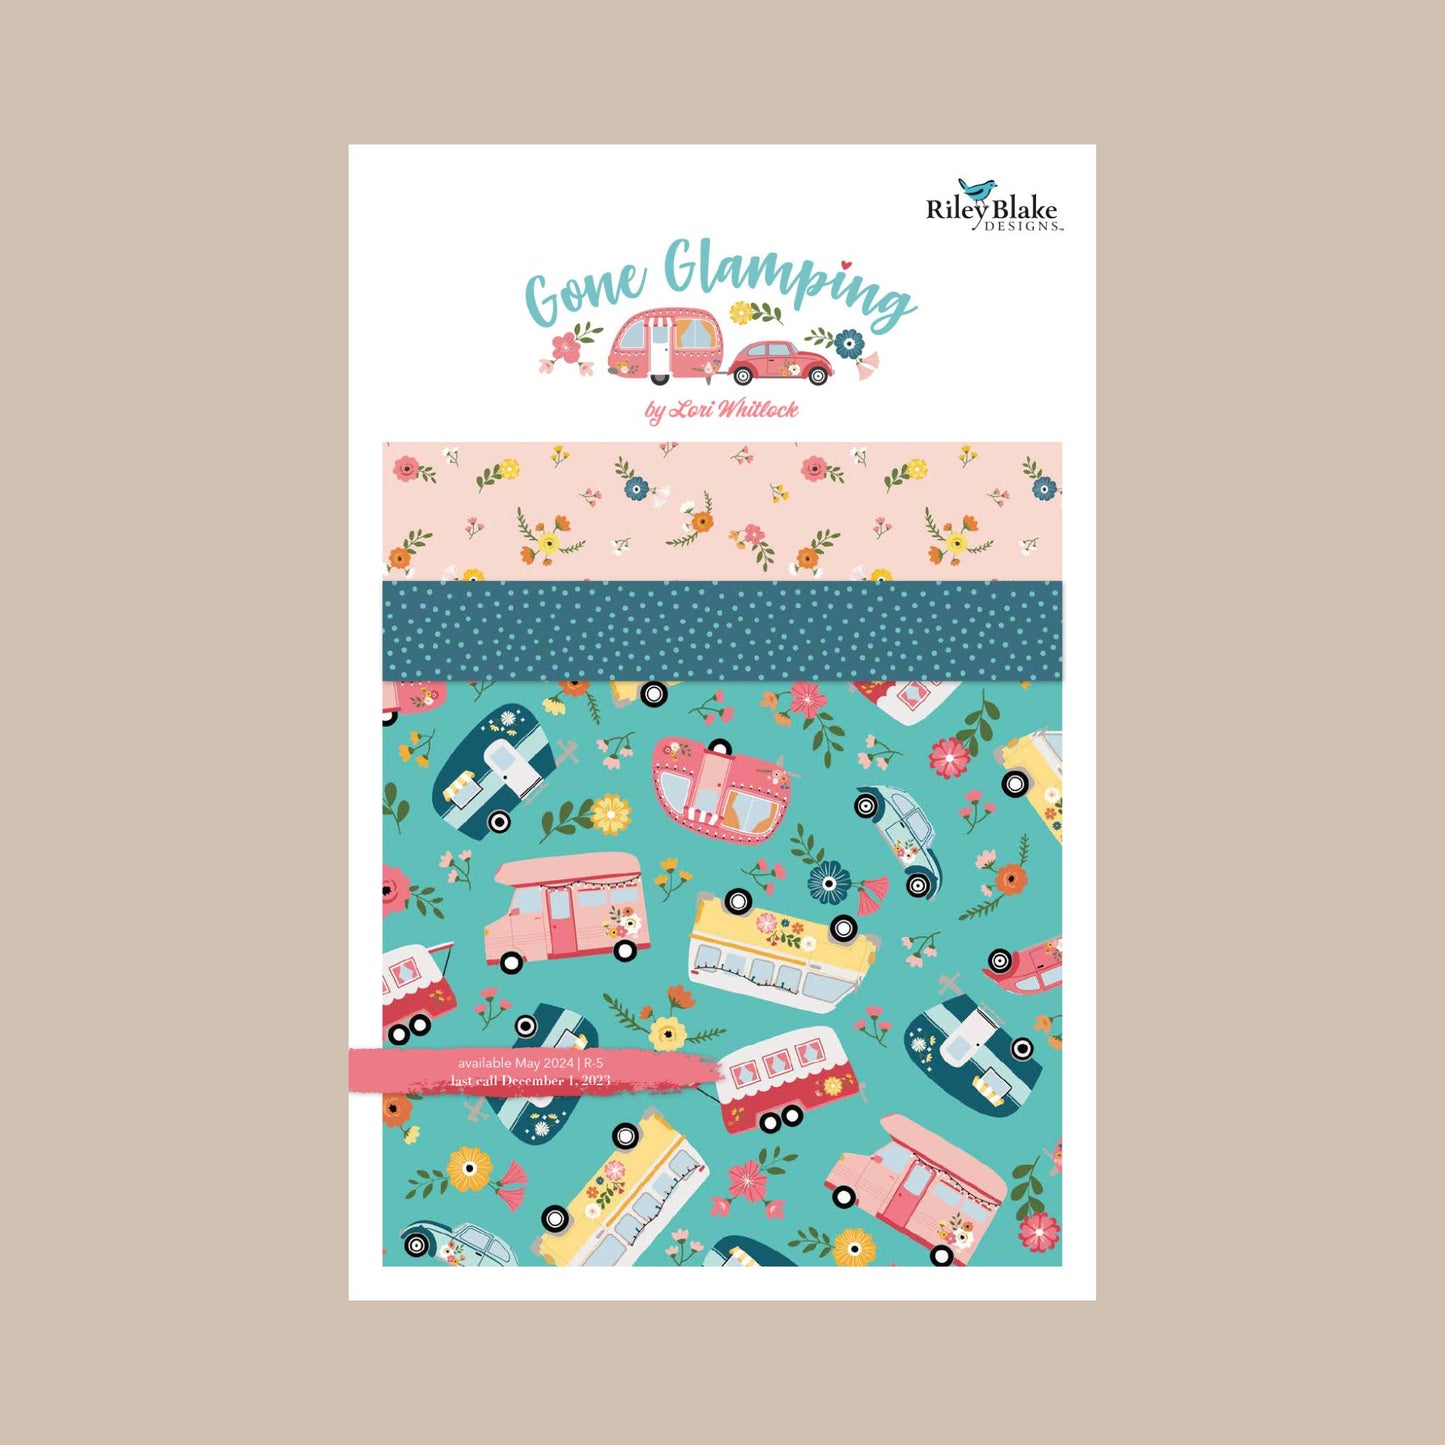 Gone Glamping for Riley Blake Camper Rolie Polie Jelly Roll by Lori Whitlock